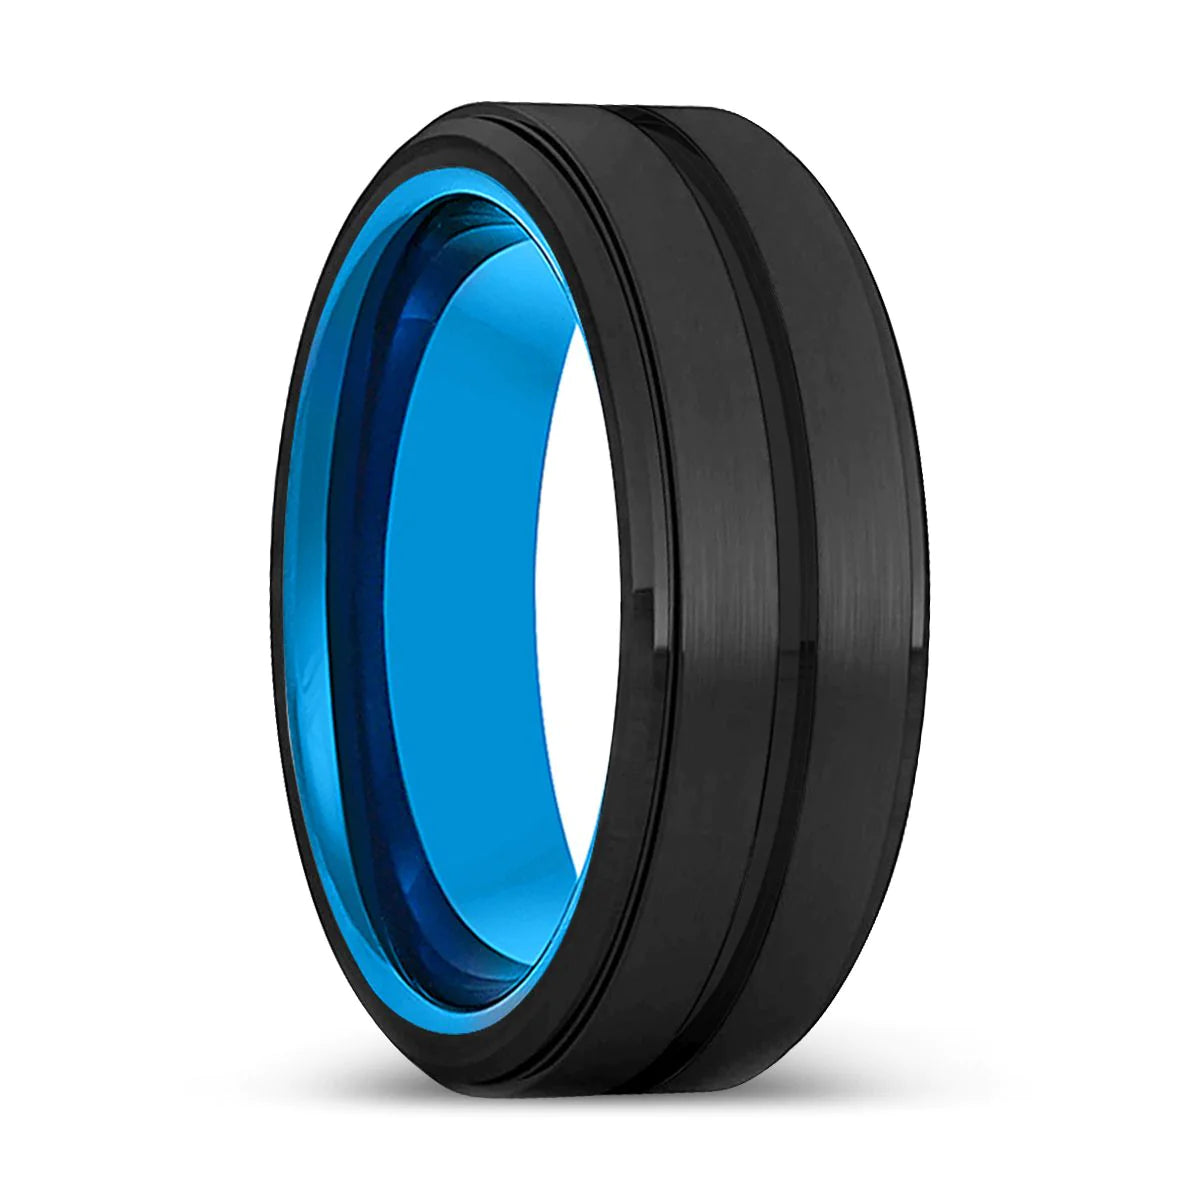 Maxton Grooved Black Tungsten Ring Stepped Edges Blue Inside - 6mm - 10mm